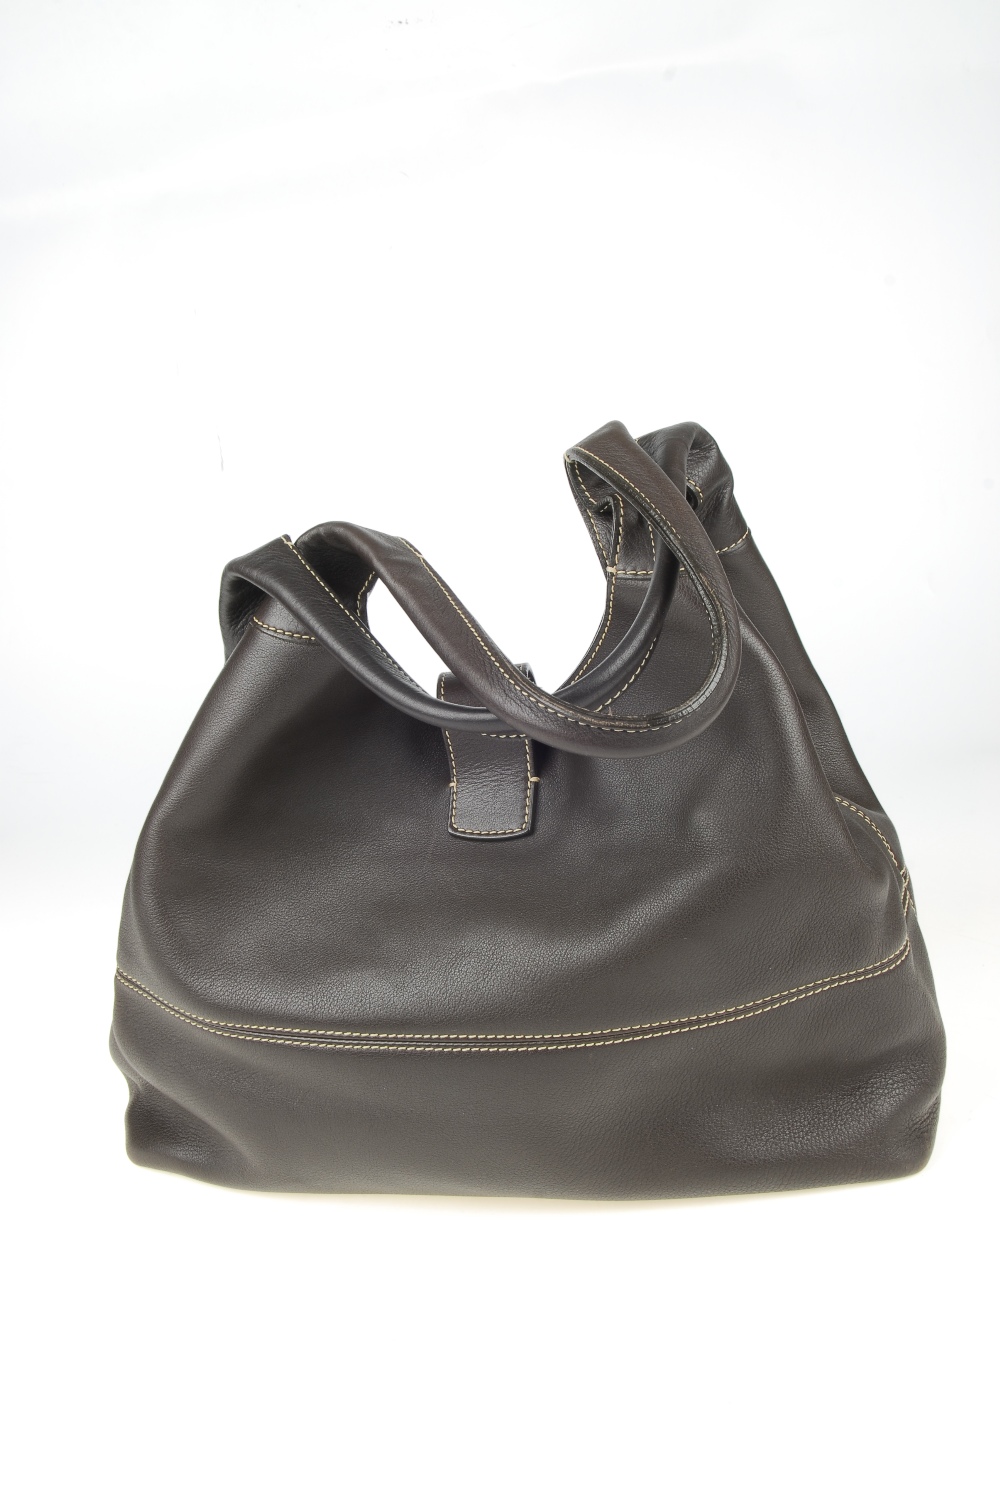 LORO PIANA - a brown leather hobo handbag. Designed from lightly grained dark brown leather with - Image 12 of 12